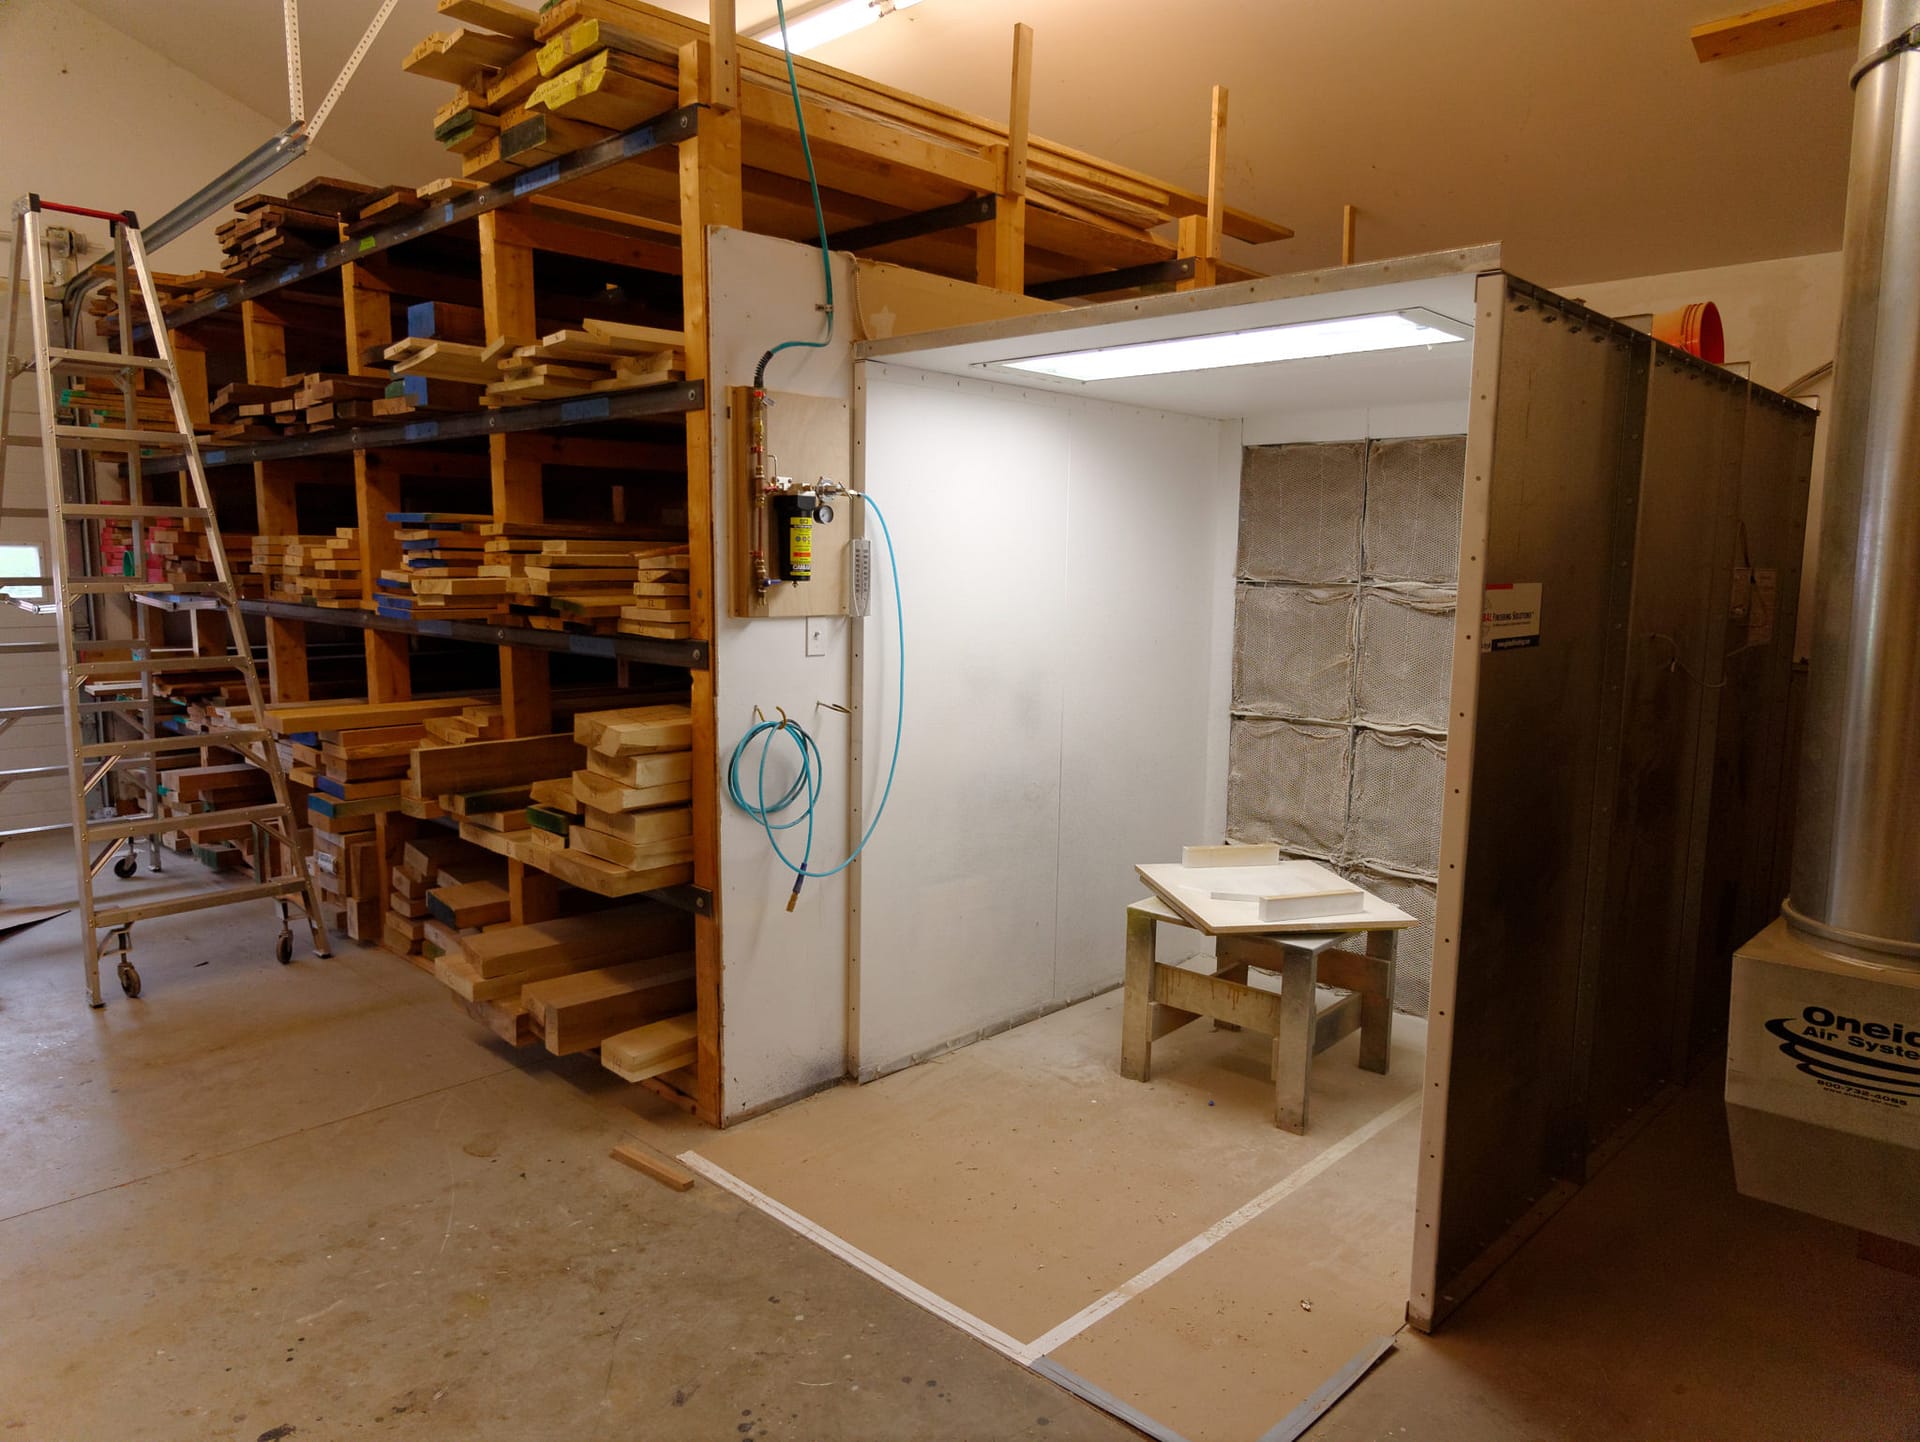 The Center's original GFS paint booth in their finishing studio - prior to expansion